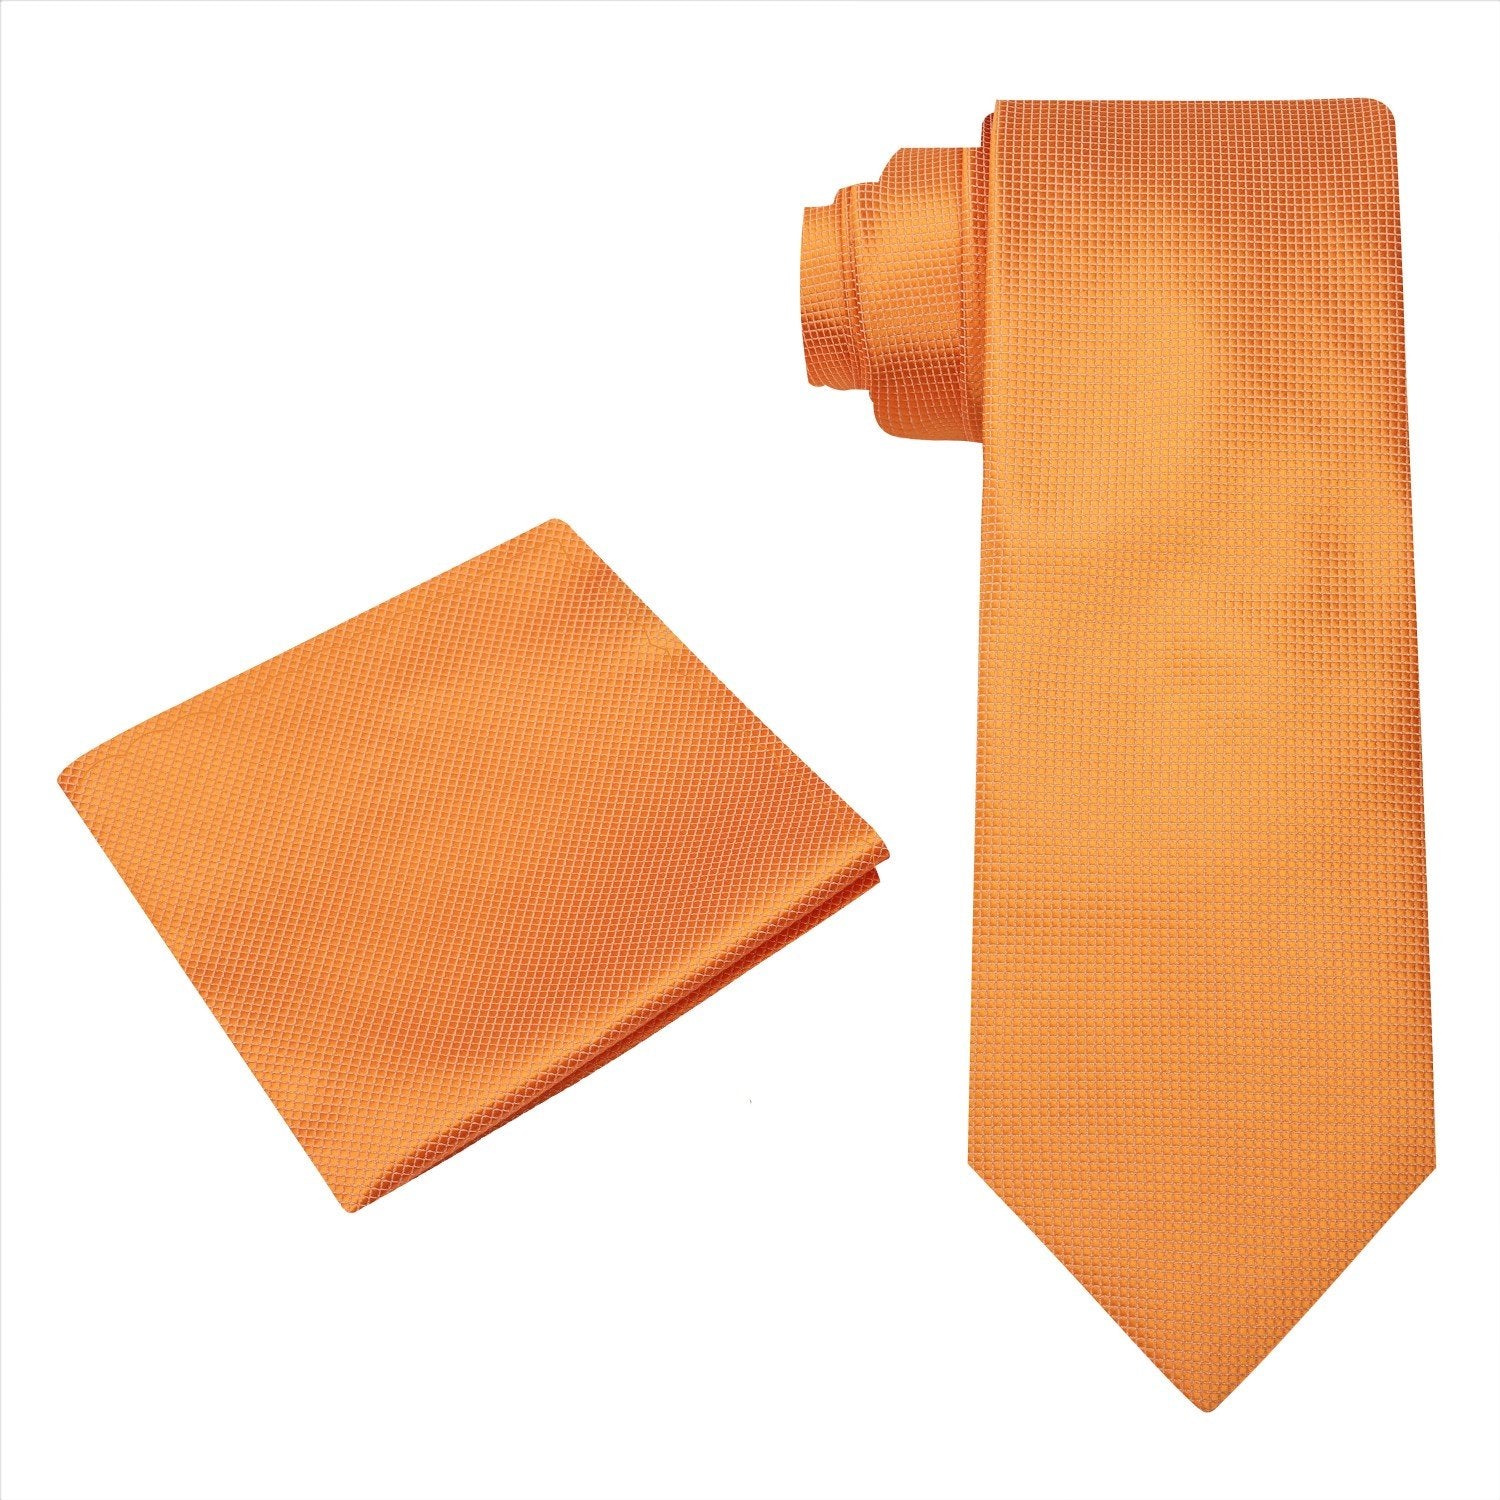 Alt View: A Solid Orange With Check Texture Pattern Silk Necktie, Matching Pocket Square